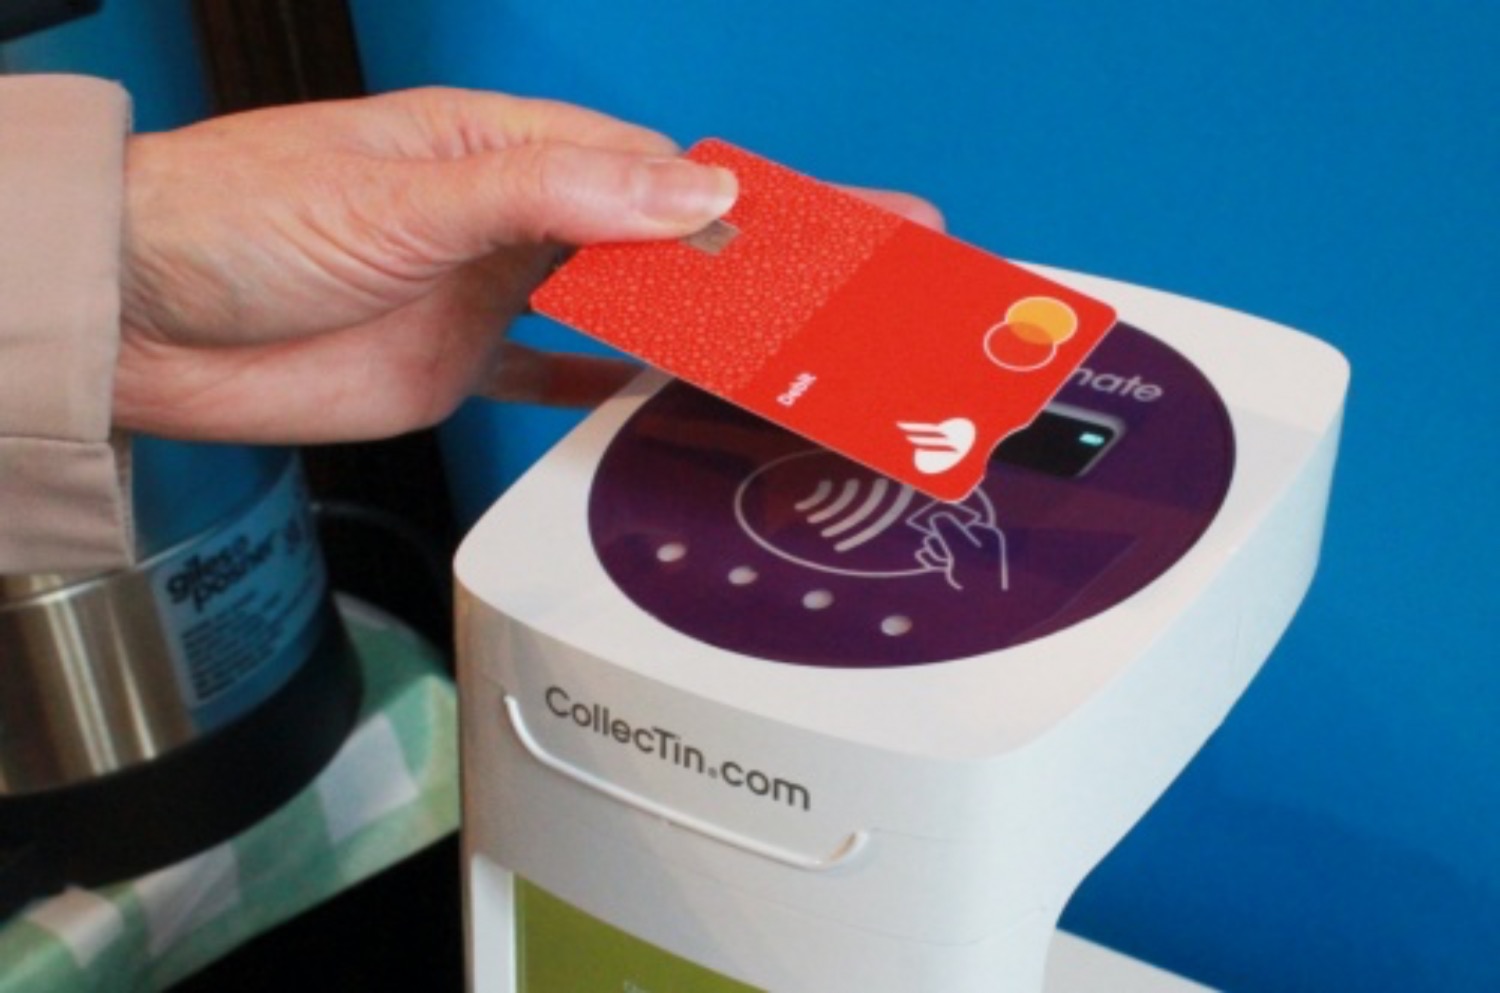 Somone tapping a bank card on a contactless payment system